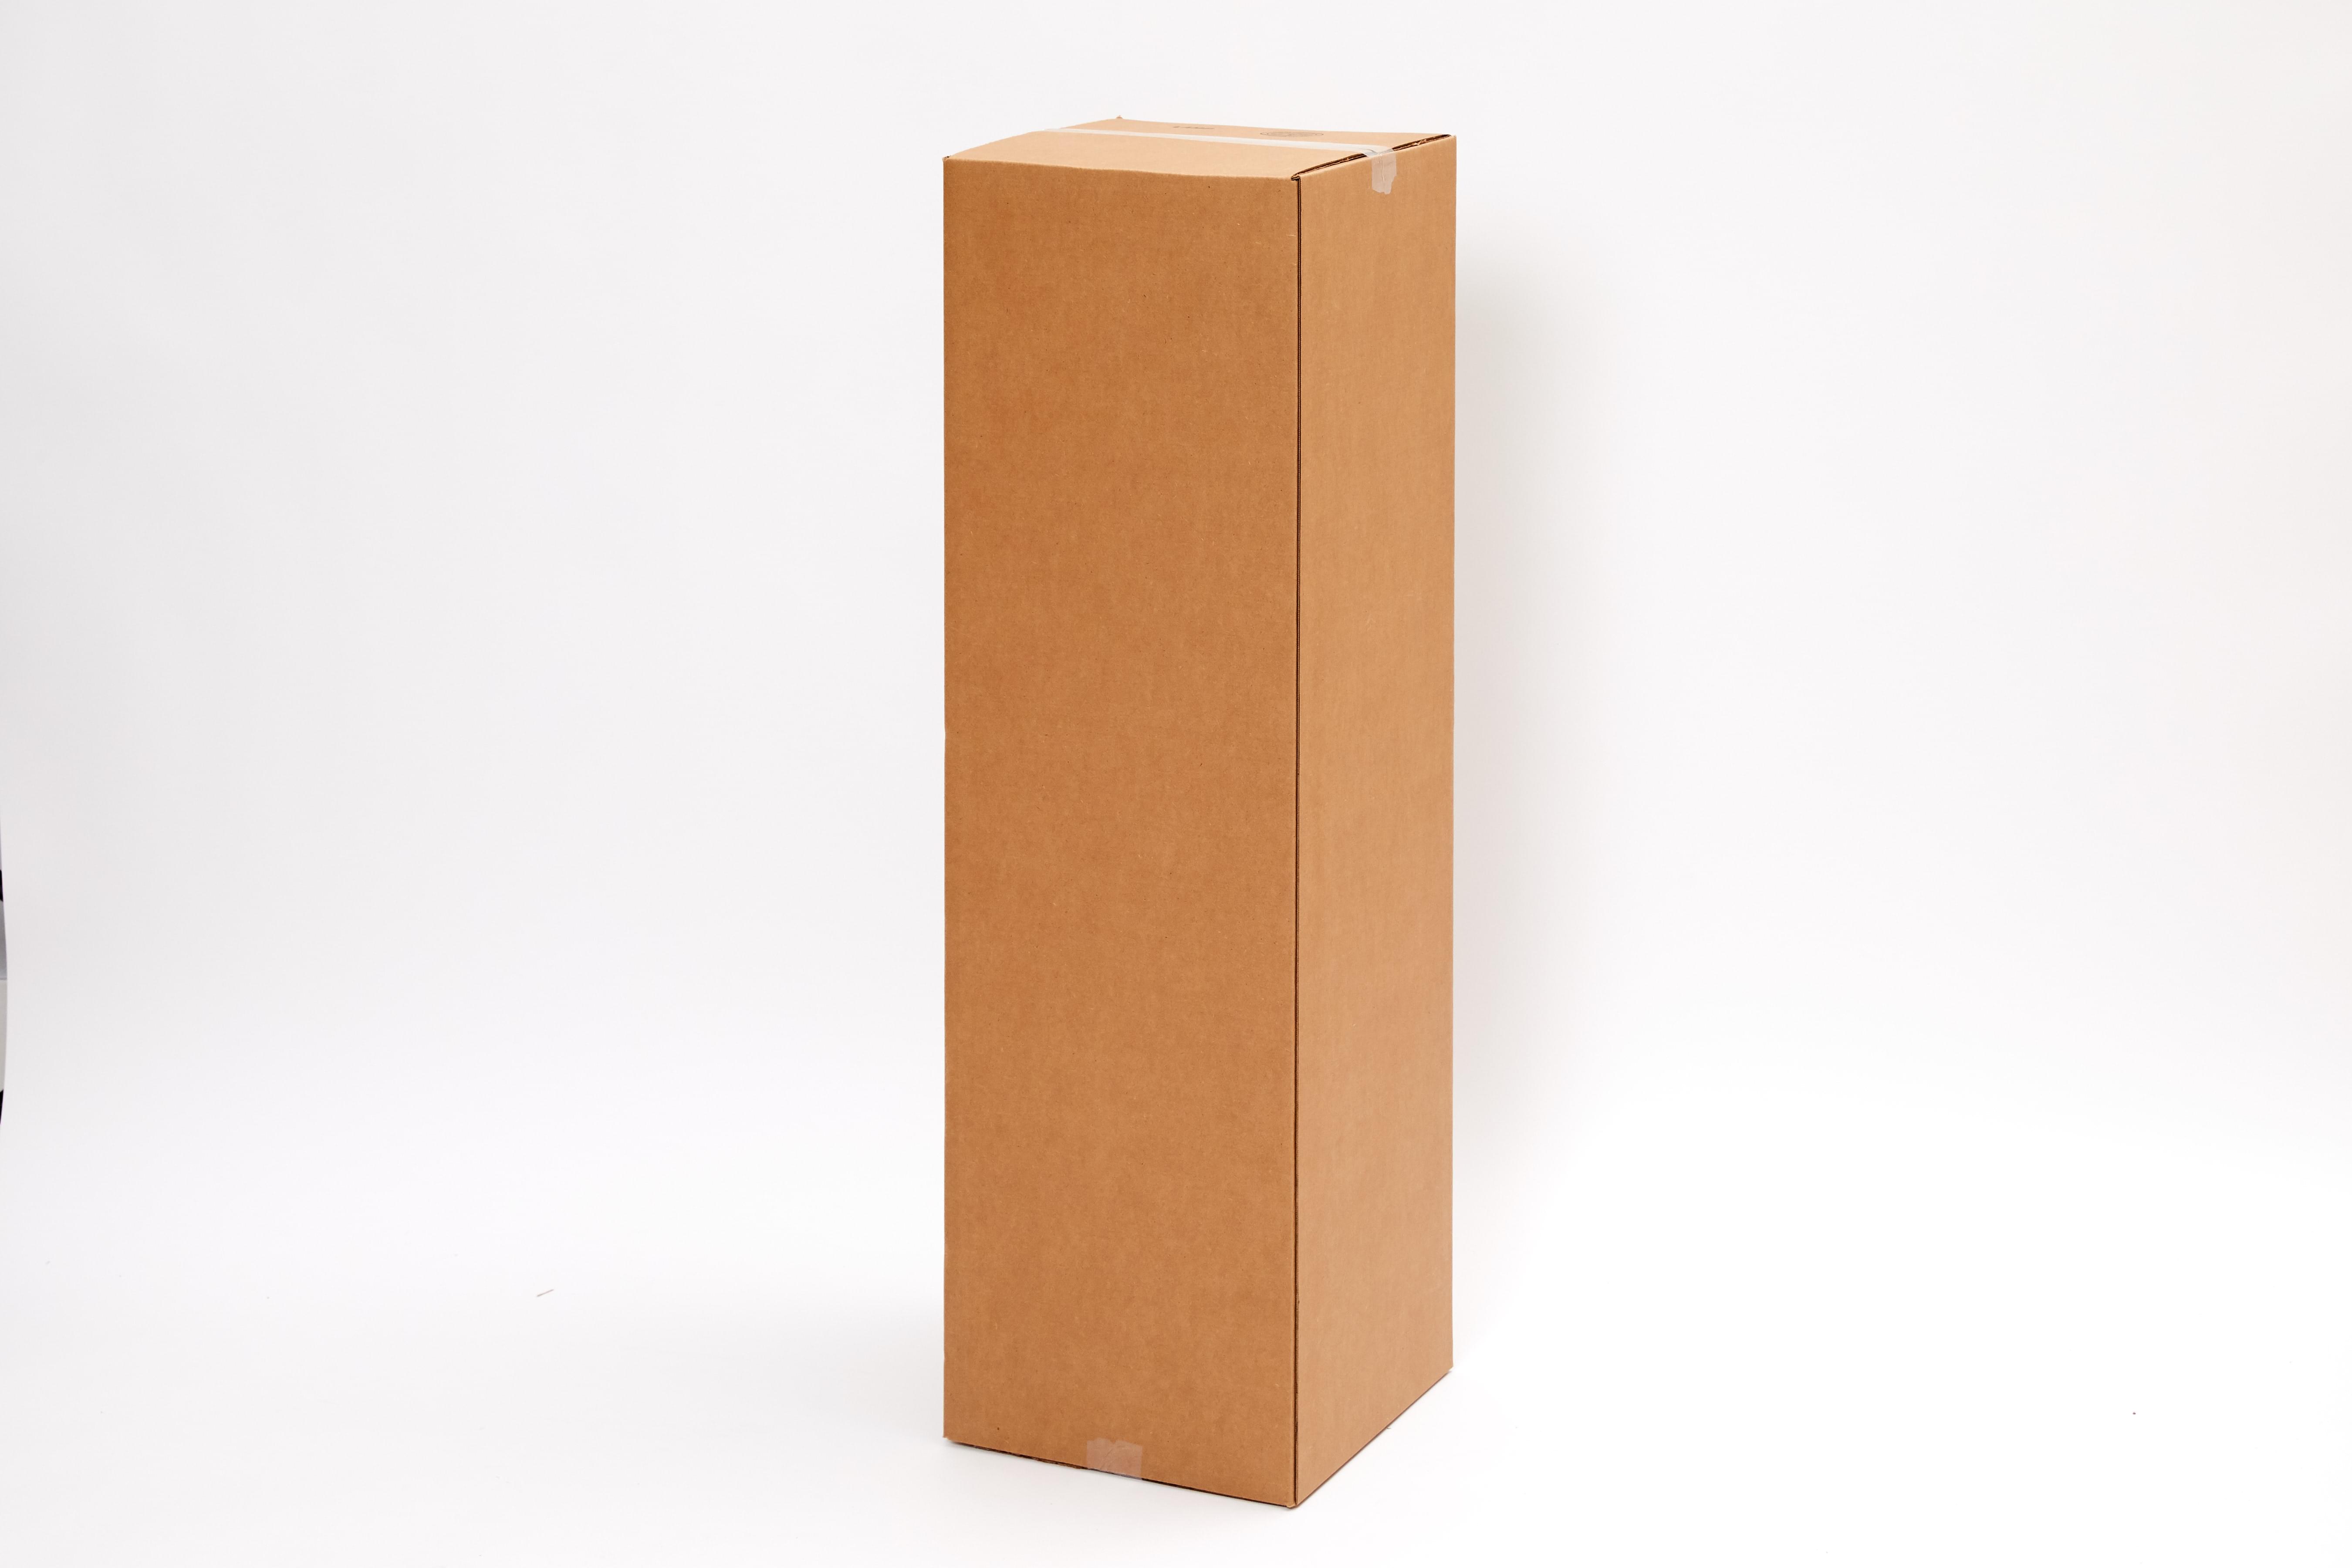 24x5x24 Small Picture Box - Long Island - 631-524-5444 - Moving Boxes